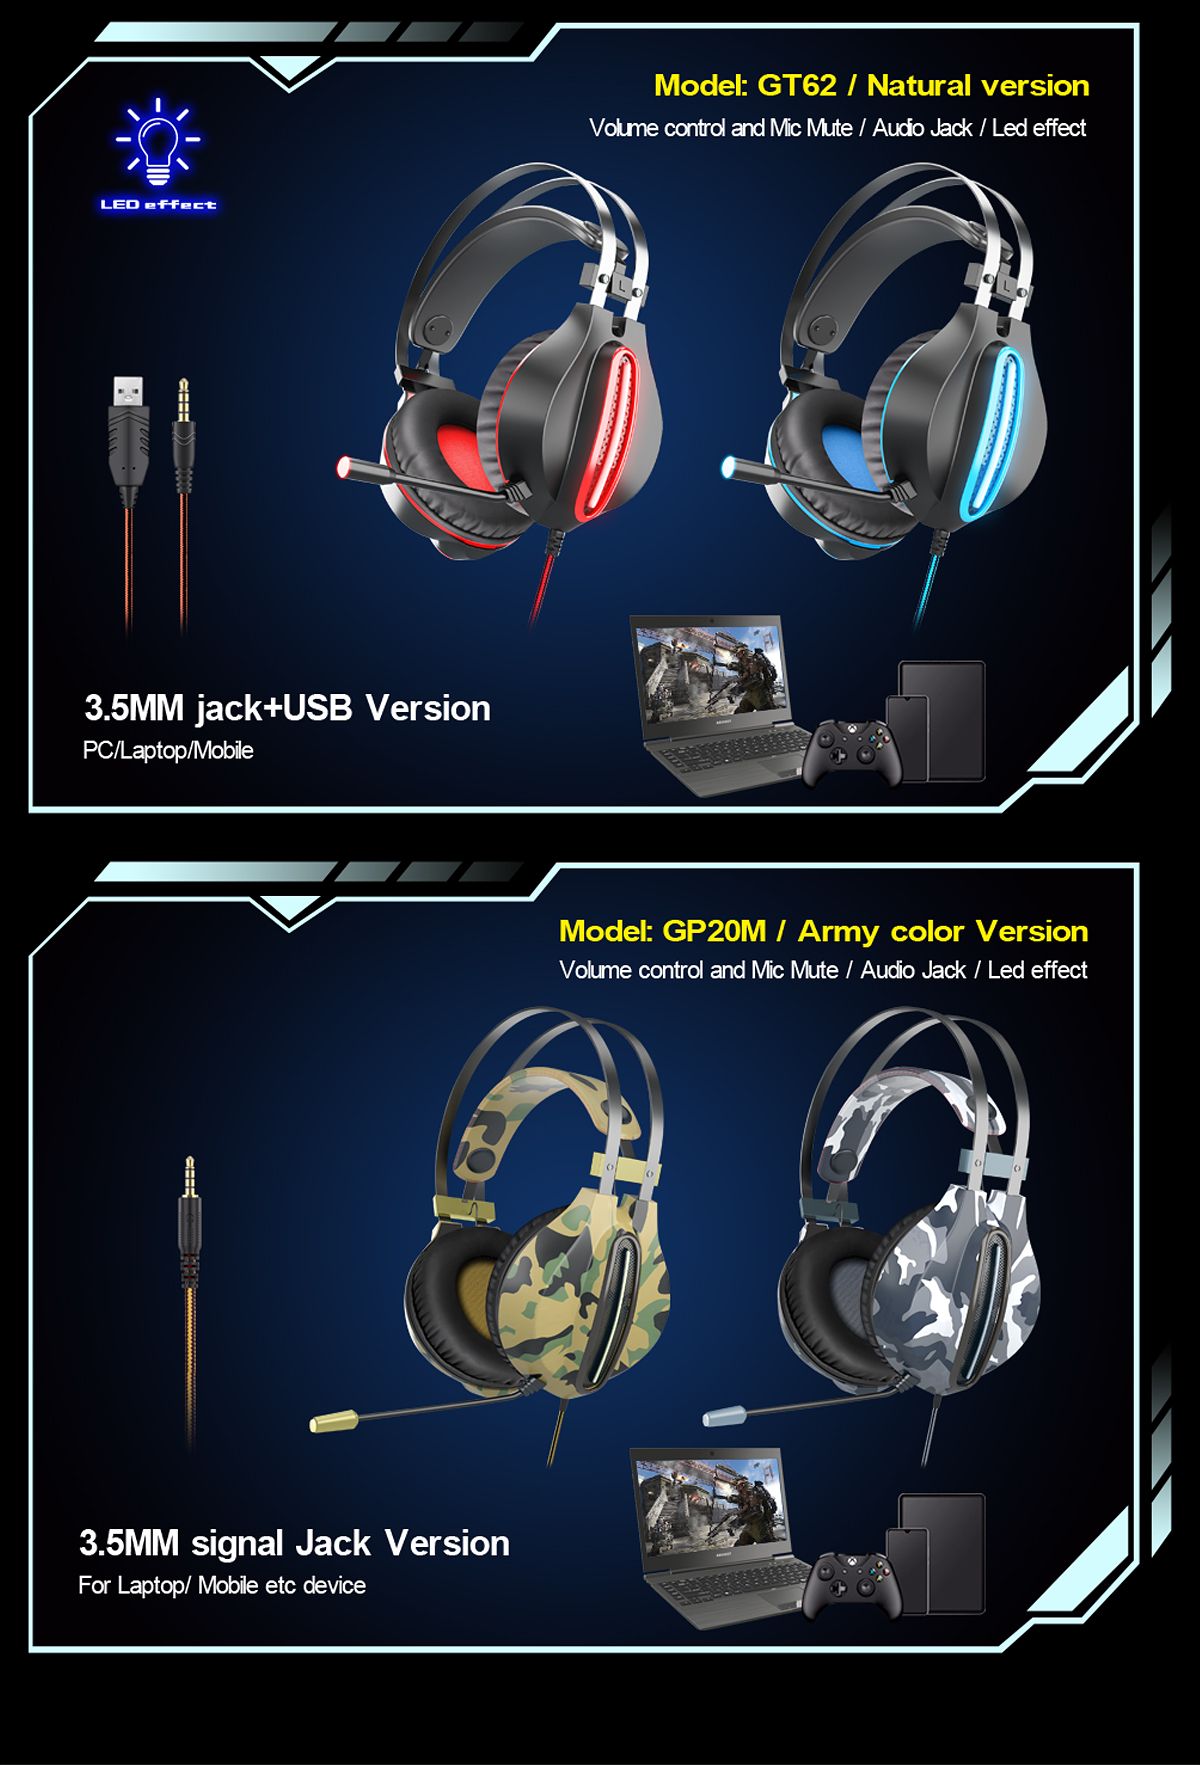 OVLENG-GT62-Wired-Gaming-Headset-35mm-Jack-50mm-Bass-Stereo-Sound-LED-Light-E-sport-Headphone-with-M-1817595-12